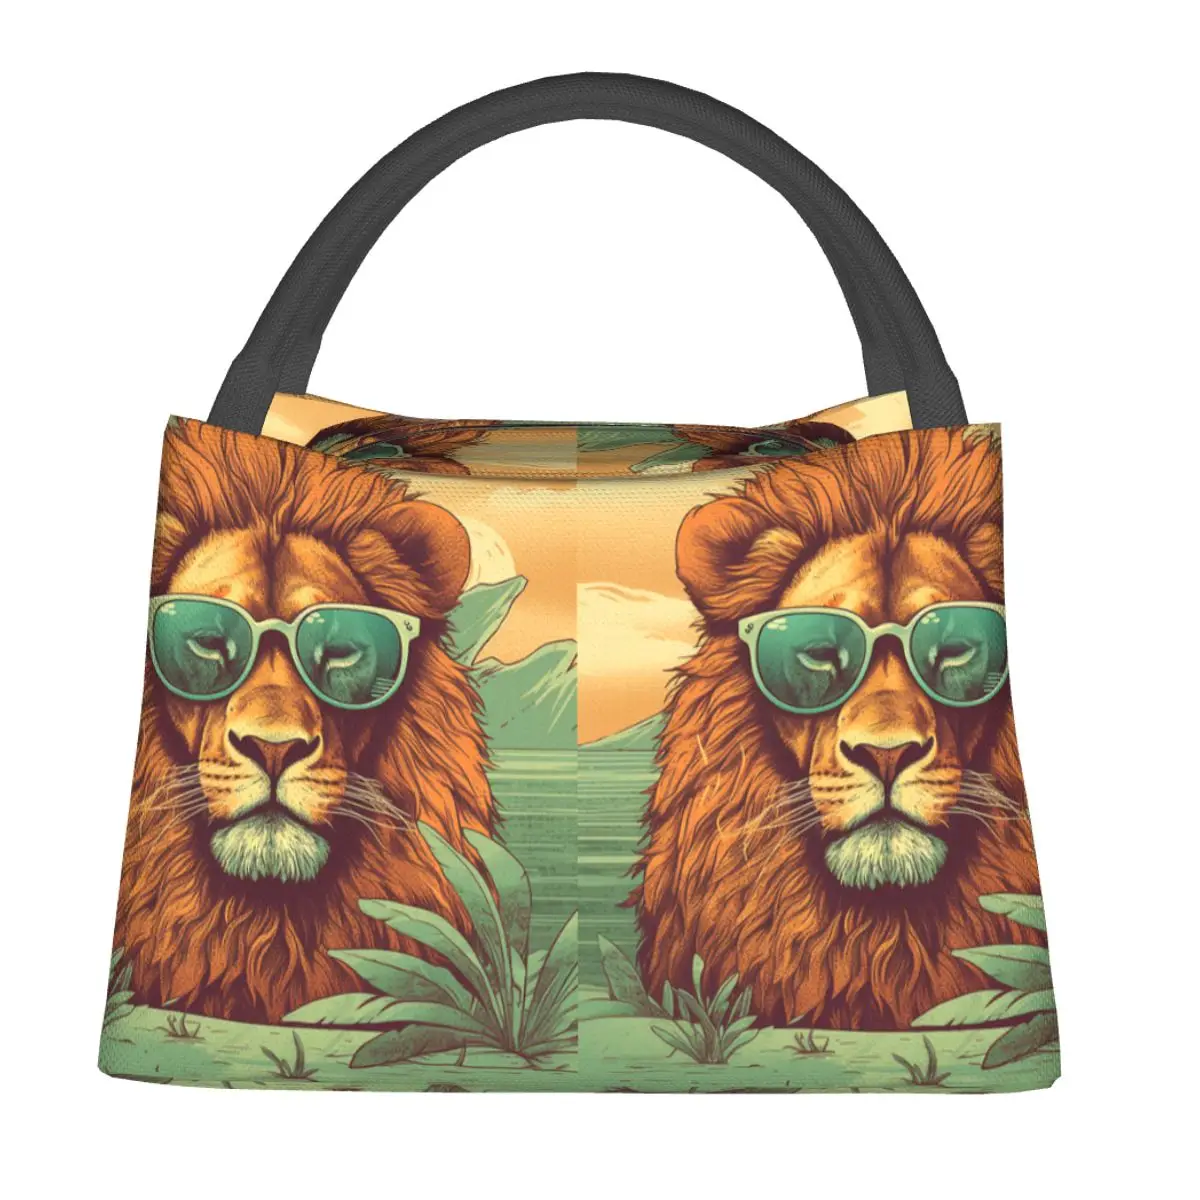 

Lion Lunch Bag Sunny Beach Sunglasses Graphic Portable Lunch Box Office Graphic Design Cooler Bag Casual Thermal Tote Handbags